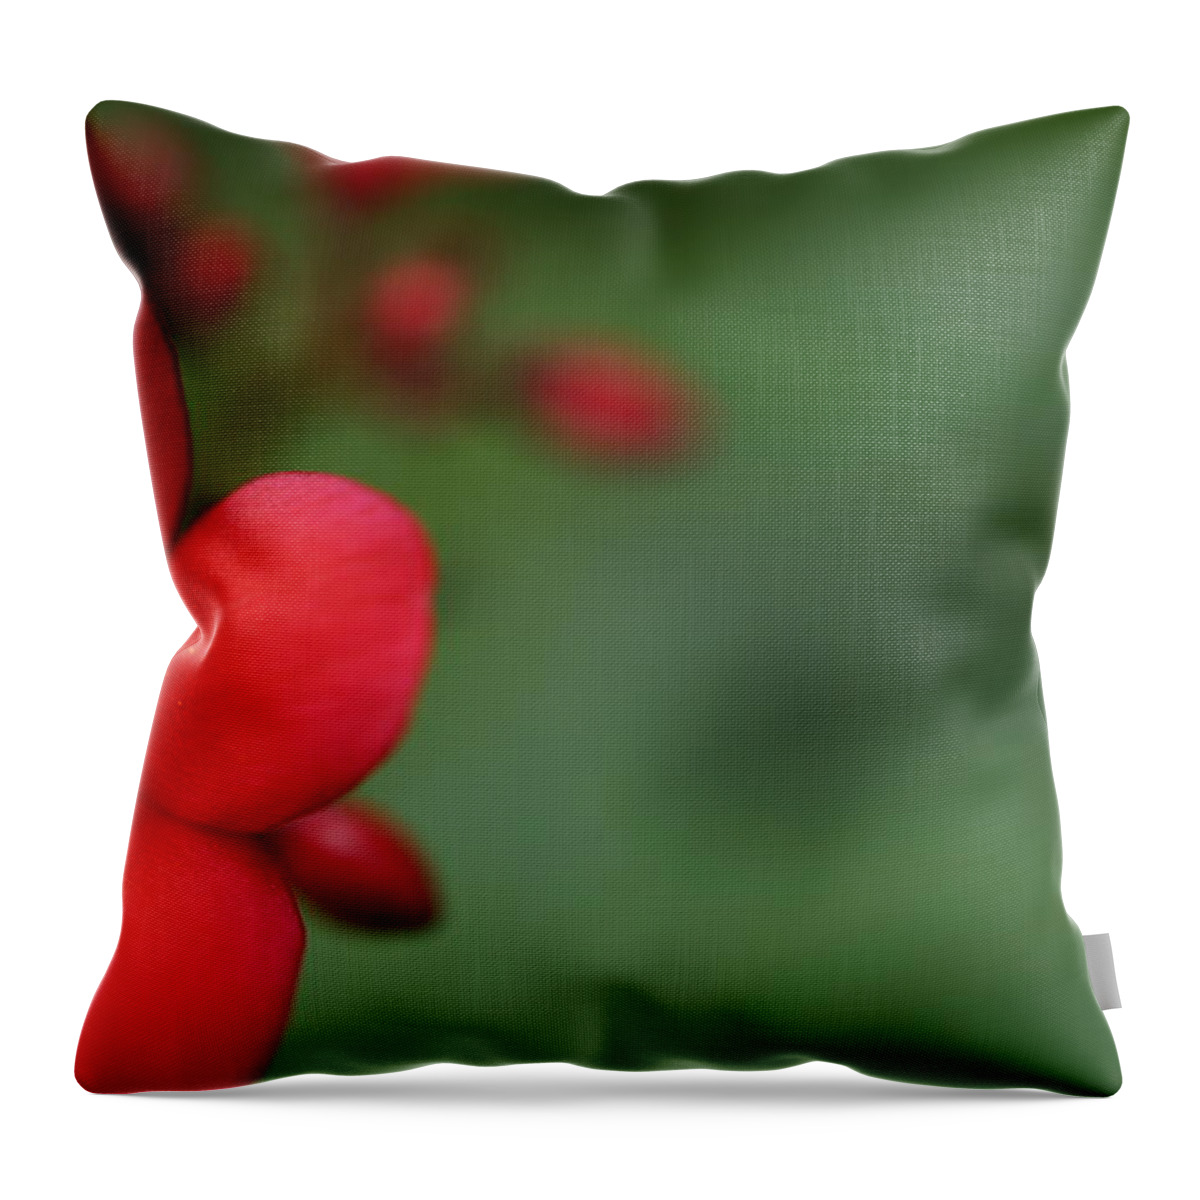 Garden Throw Pillow featuring the photograph Red Flower by Faashie Sha